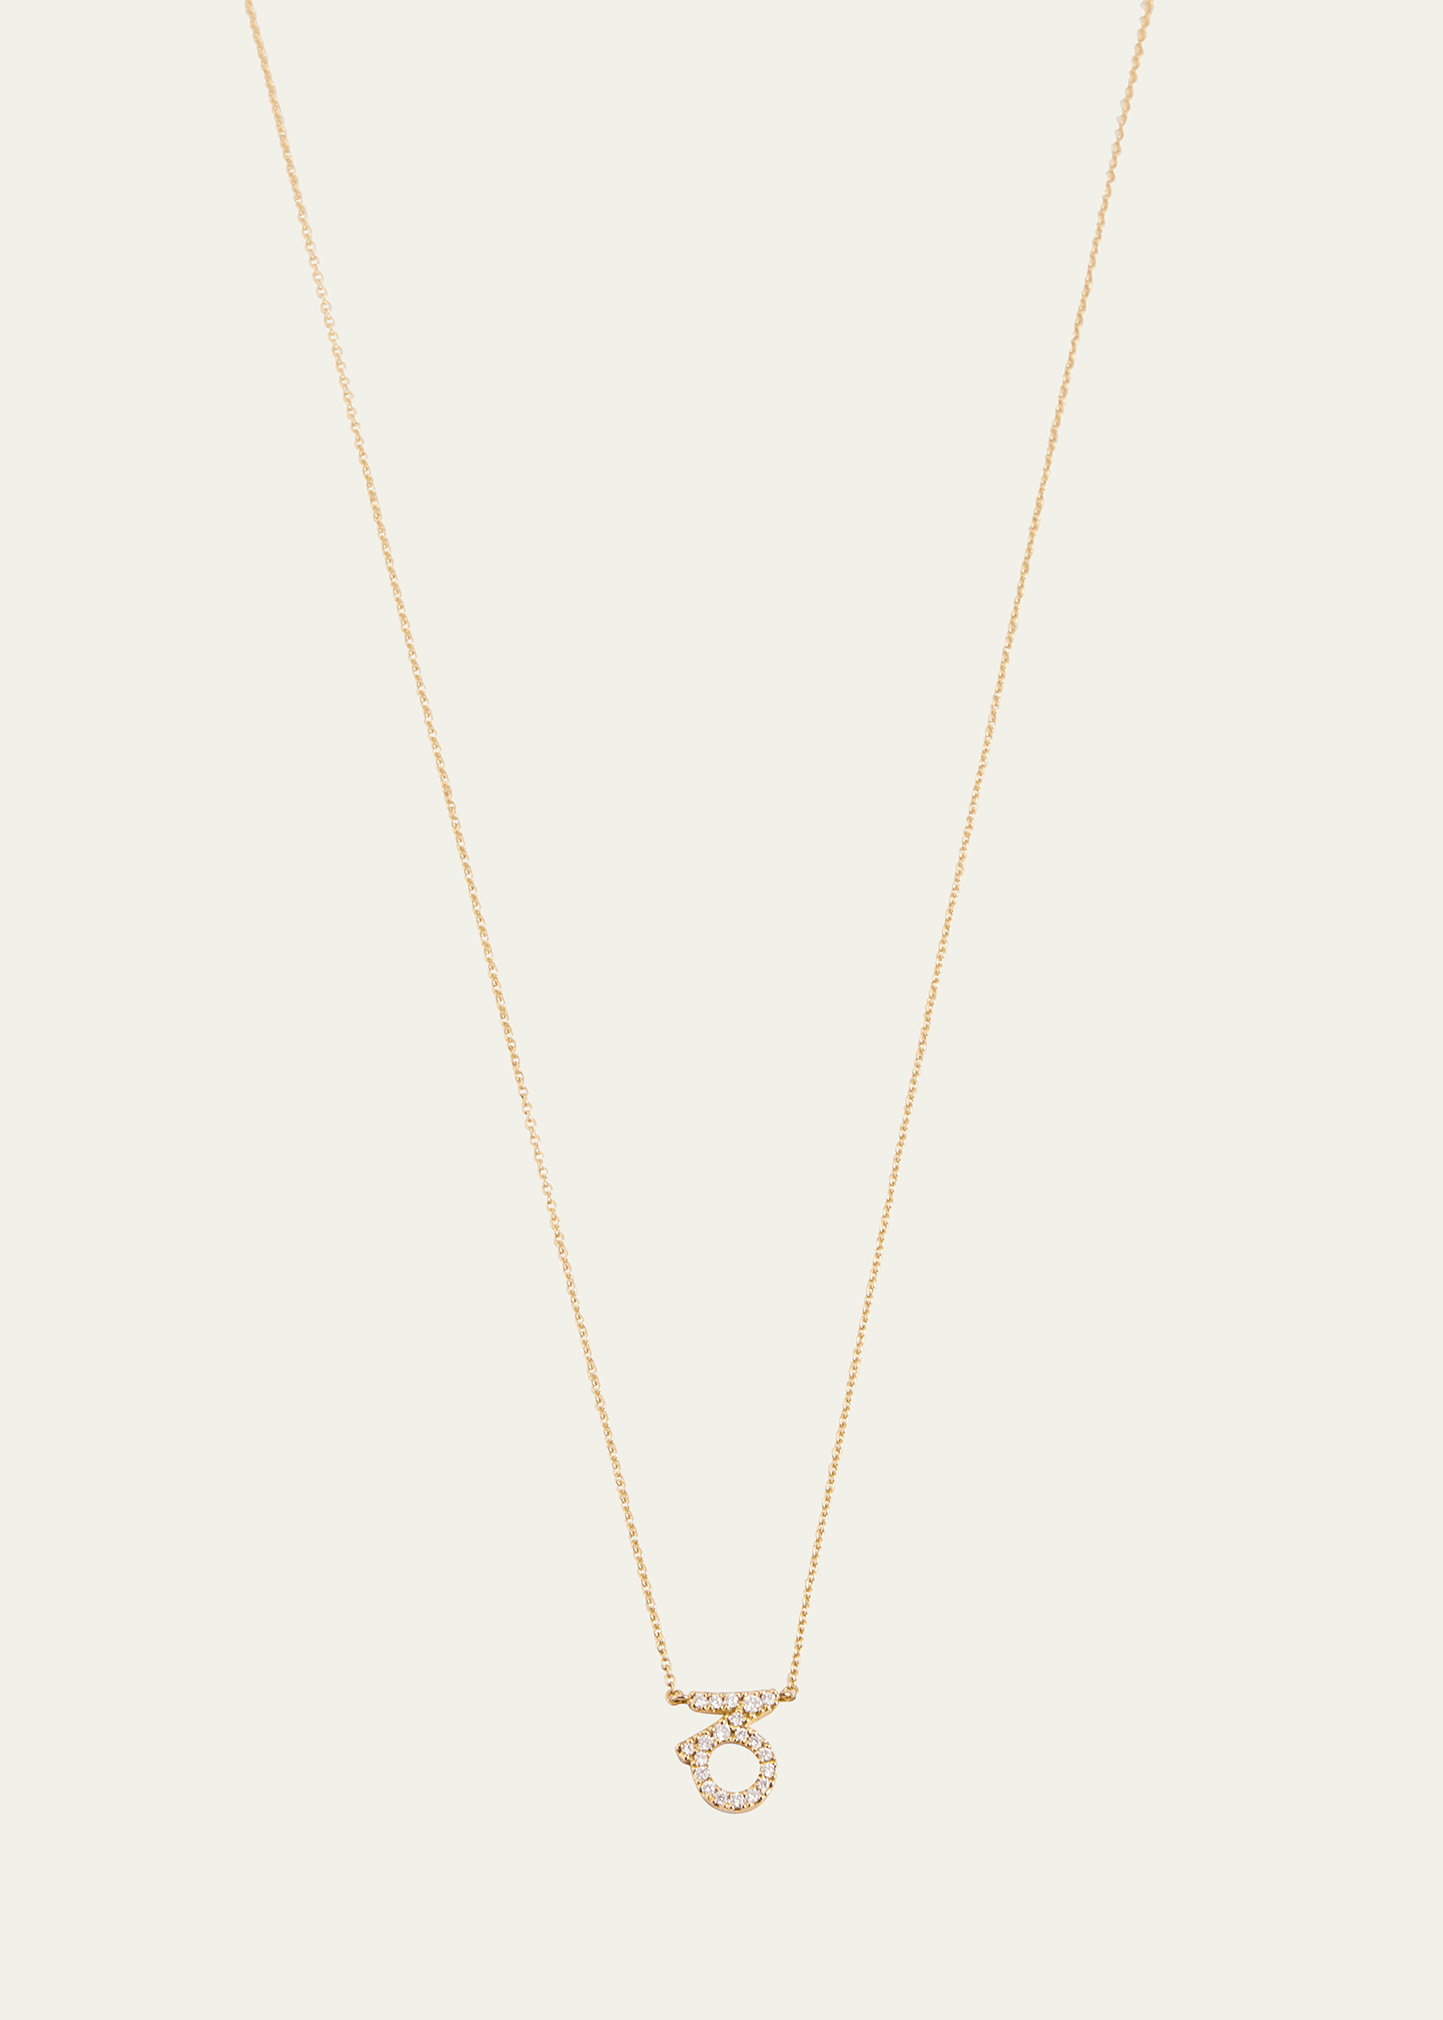 Star Sign Necklace, Capricorn, in Yellow Gold and White Diamonds